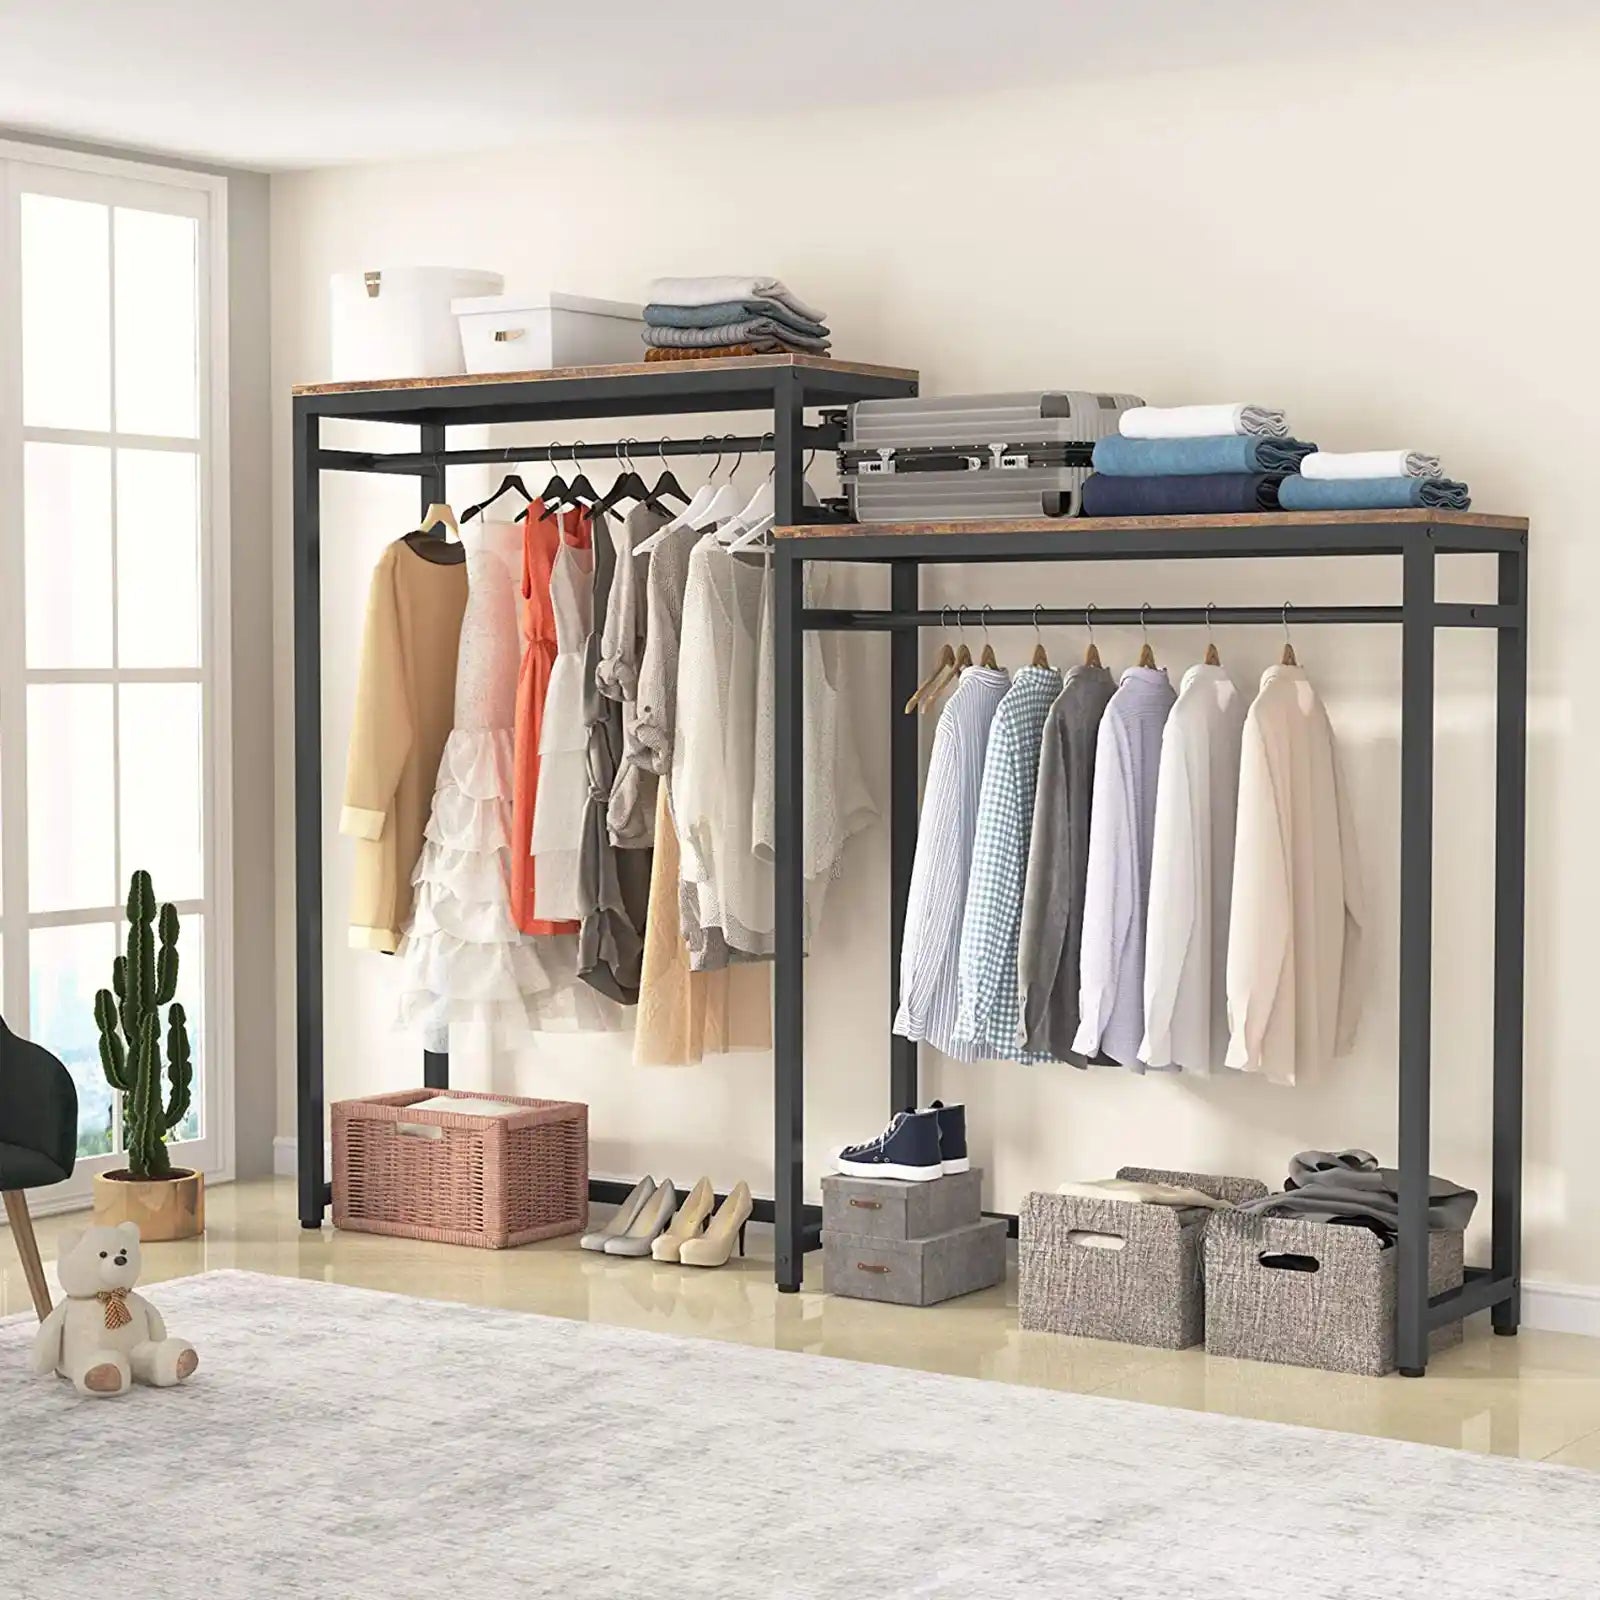 Convertible Storage Shelves and Double Hanging Rod